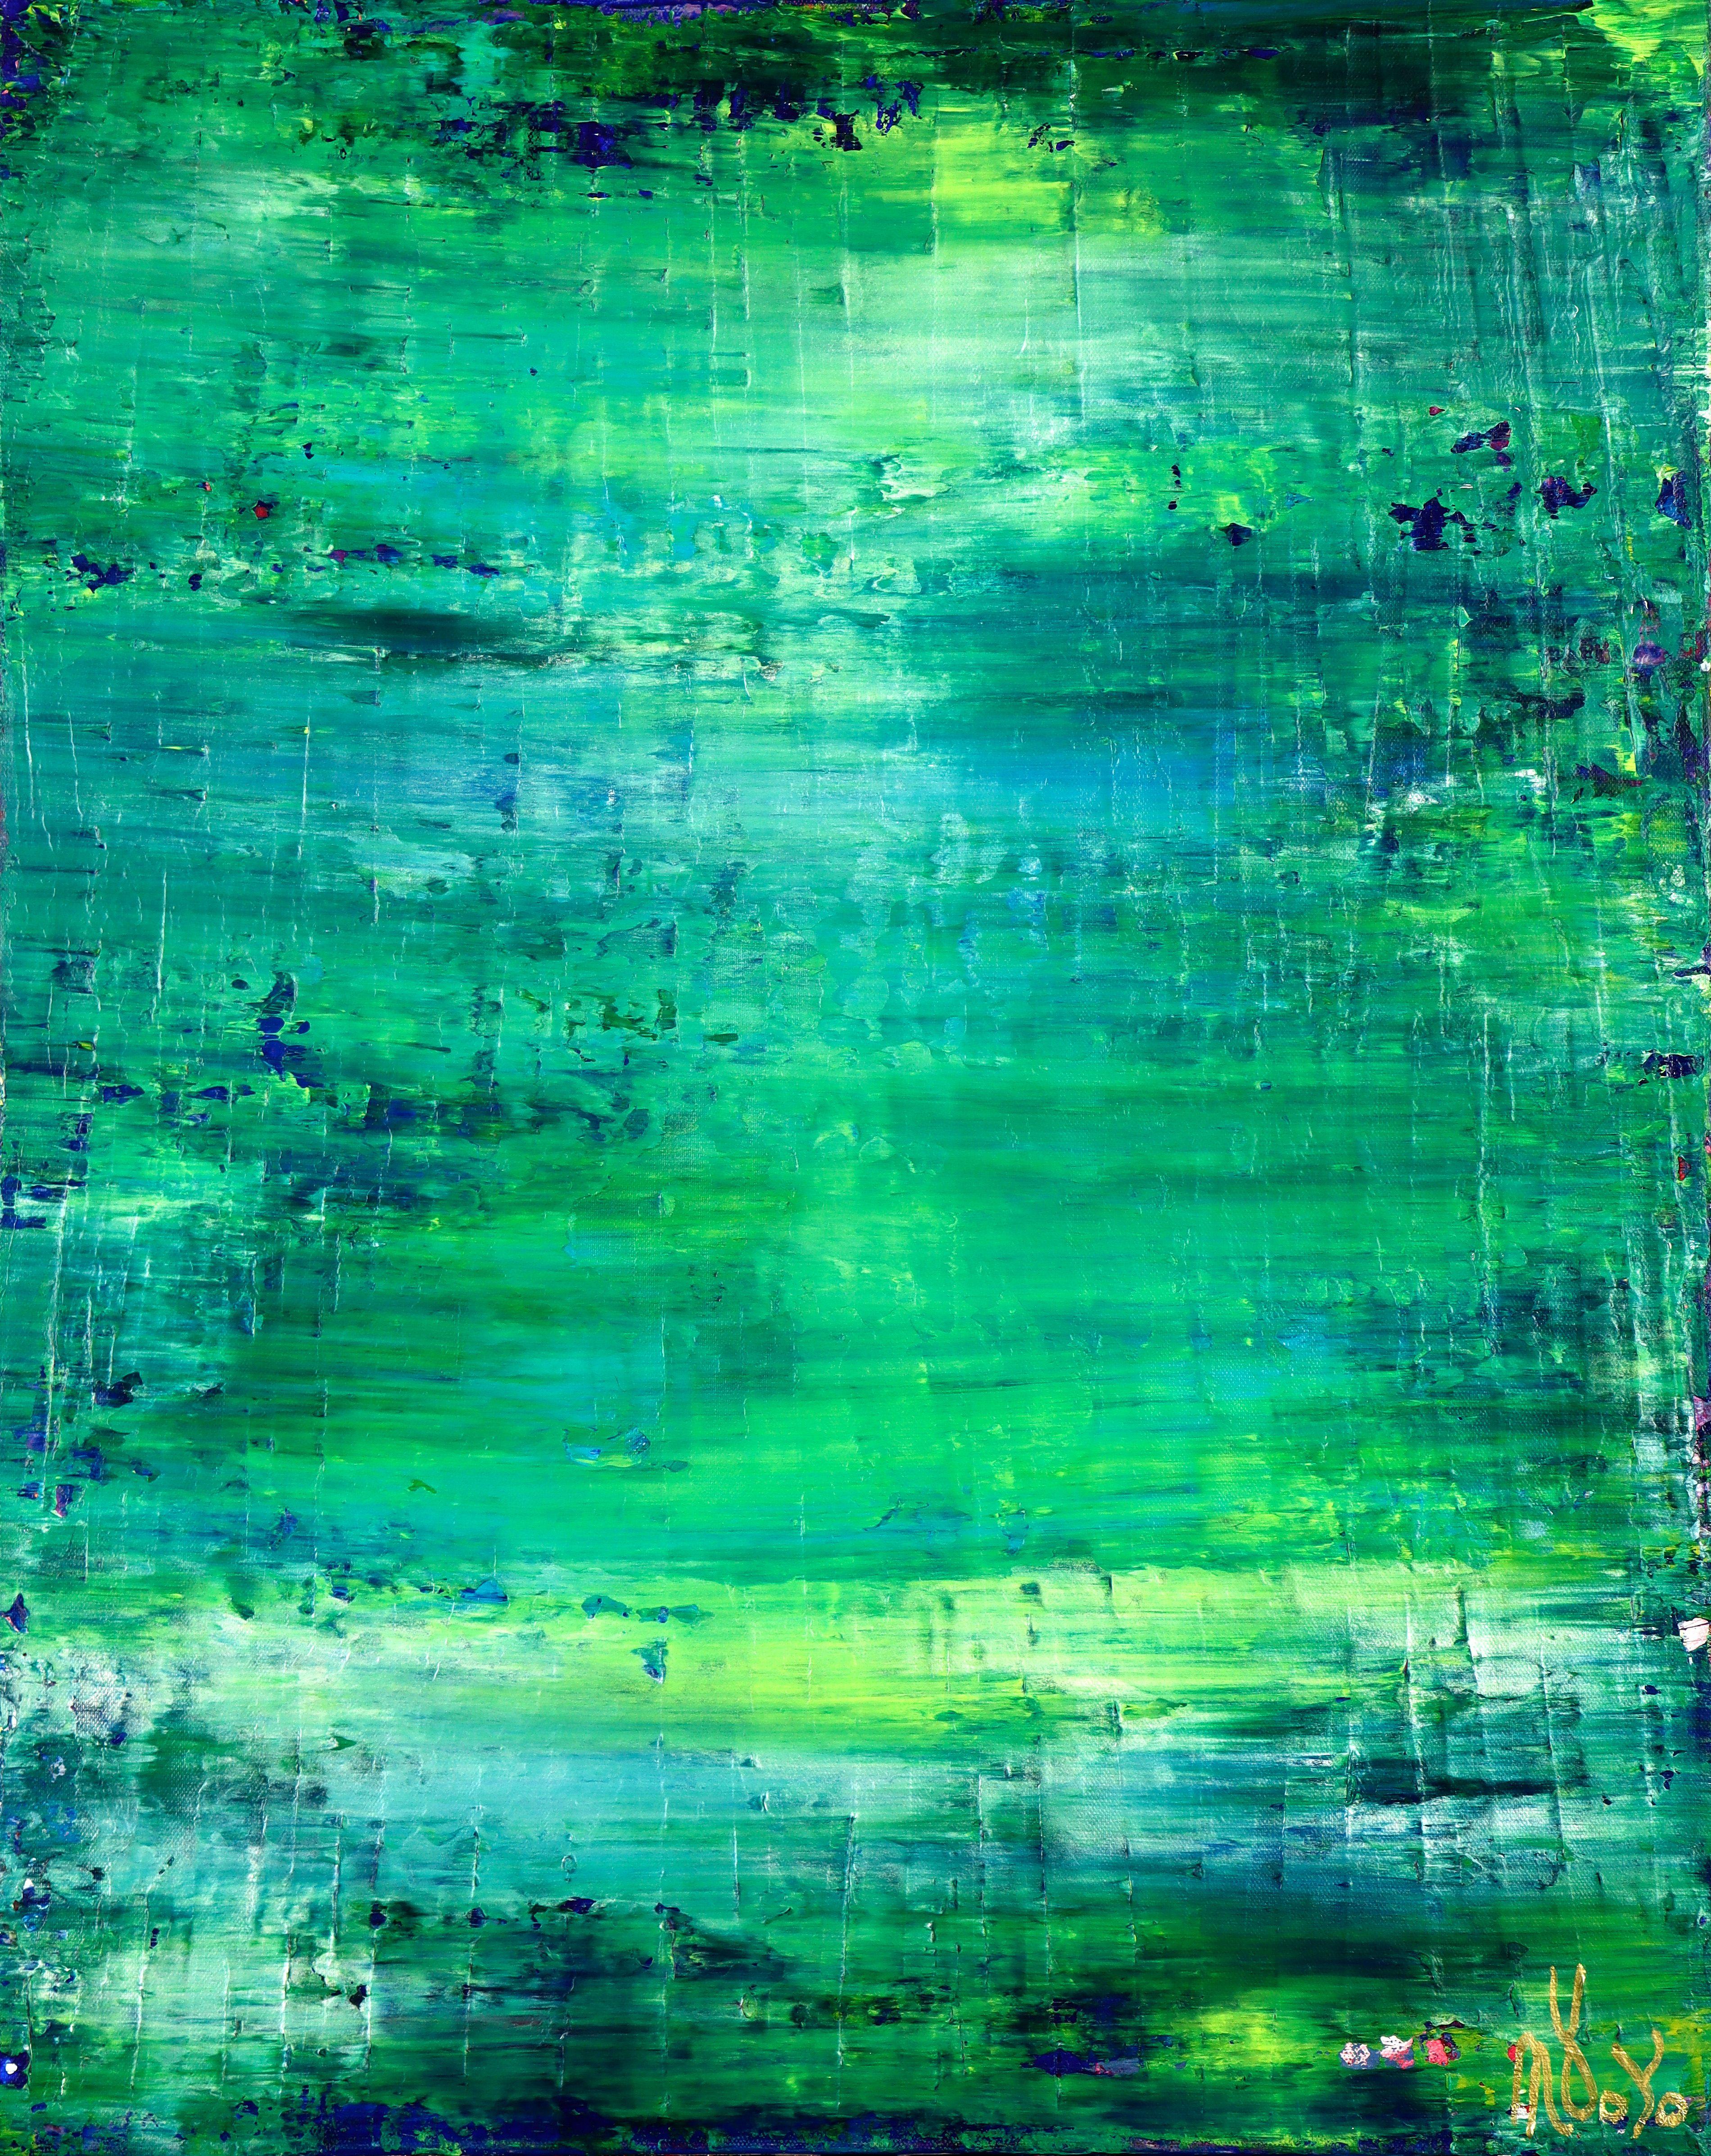 Abstract with shades of green, and gloss finish. Created using palette knifes and fine paint layers. Signed in front. Ready to hang    I include a certificate of authenticity that lists the materials as well as when the painting was completed. Fine